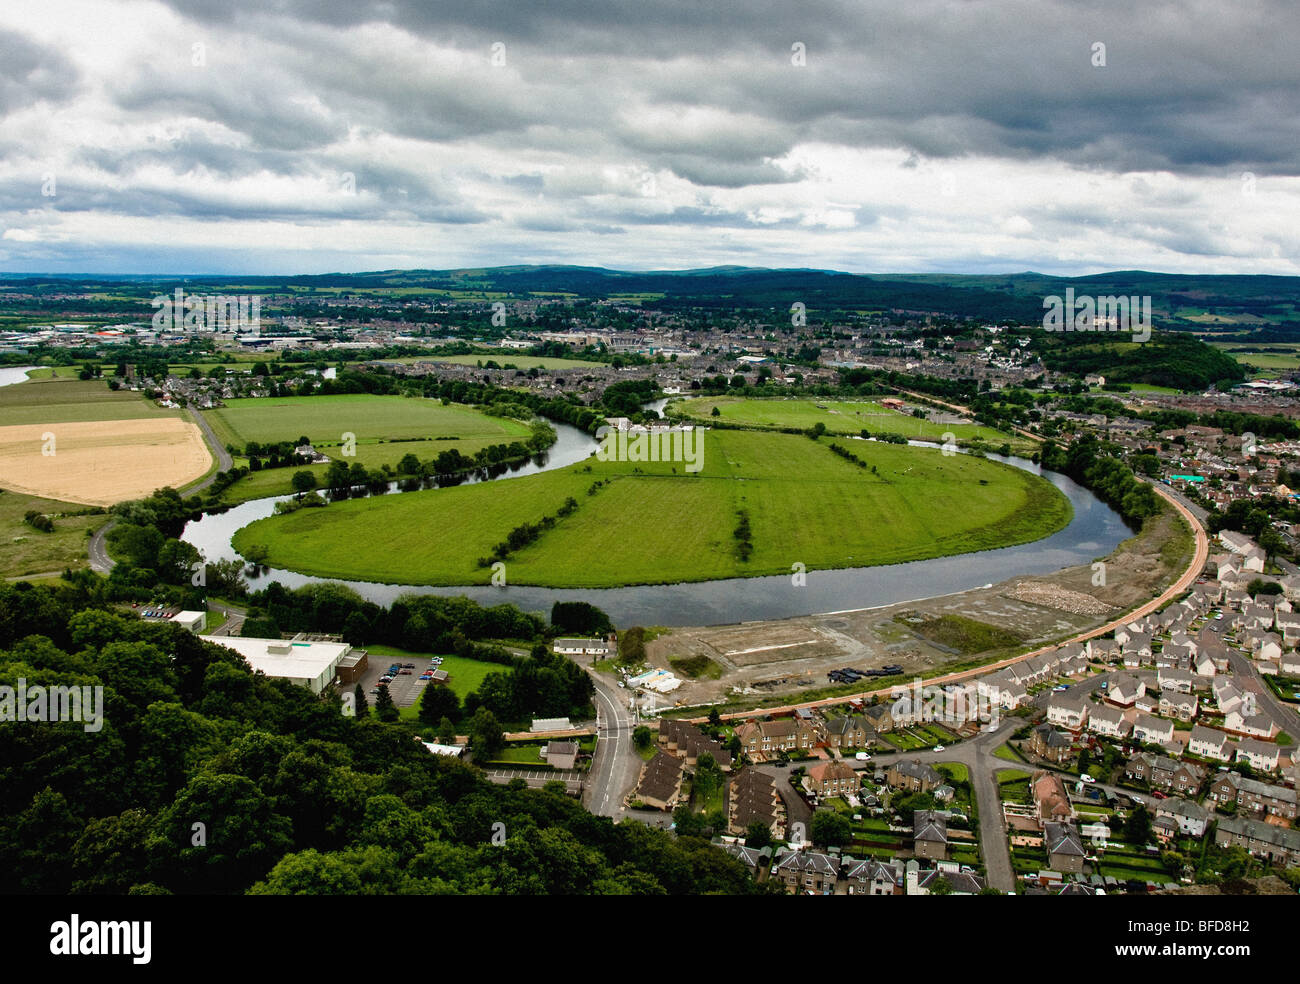 Aerial shot of River Forth with city of Stirling in the foreground with The Ochil Hills and The Pentlands Hills in the East. Stock Photo